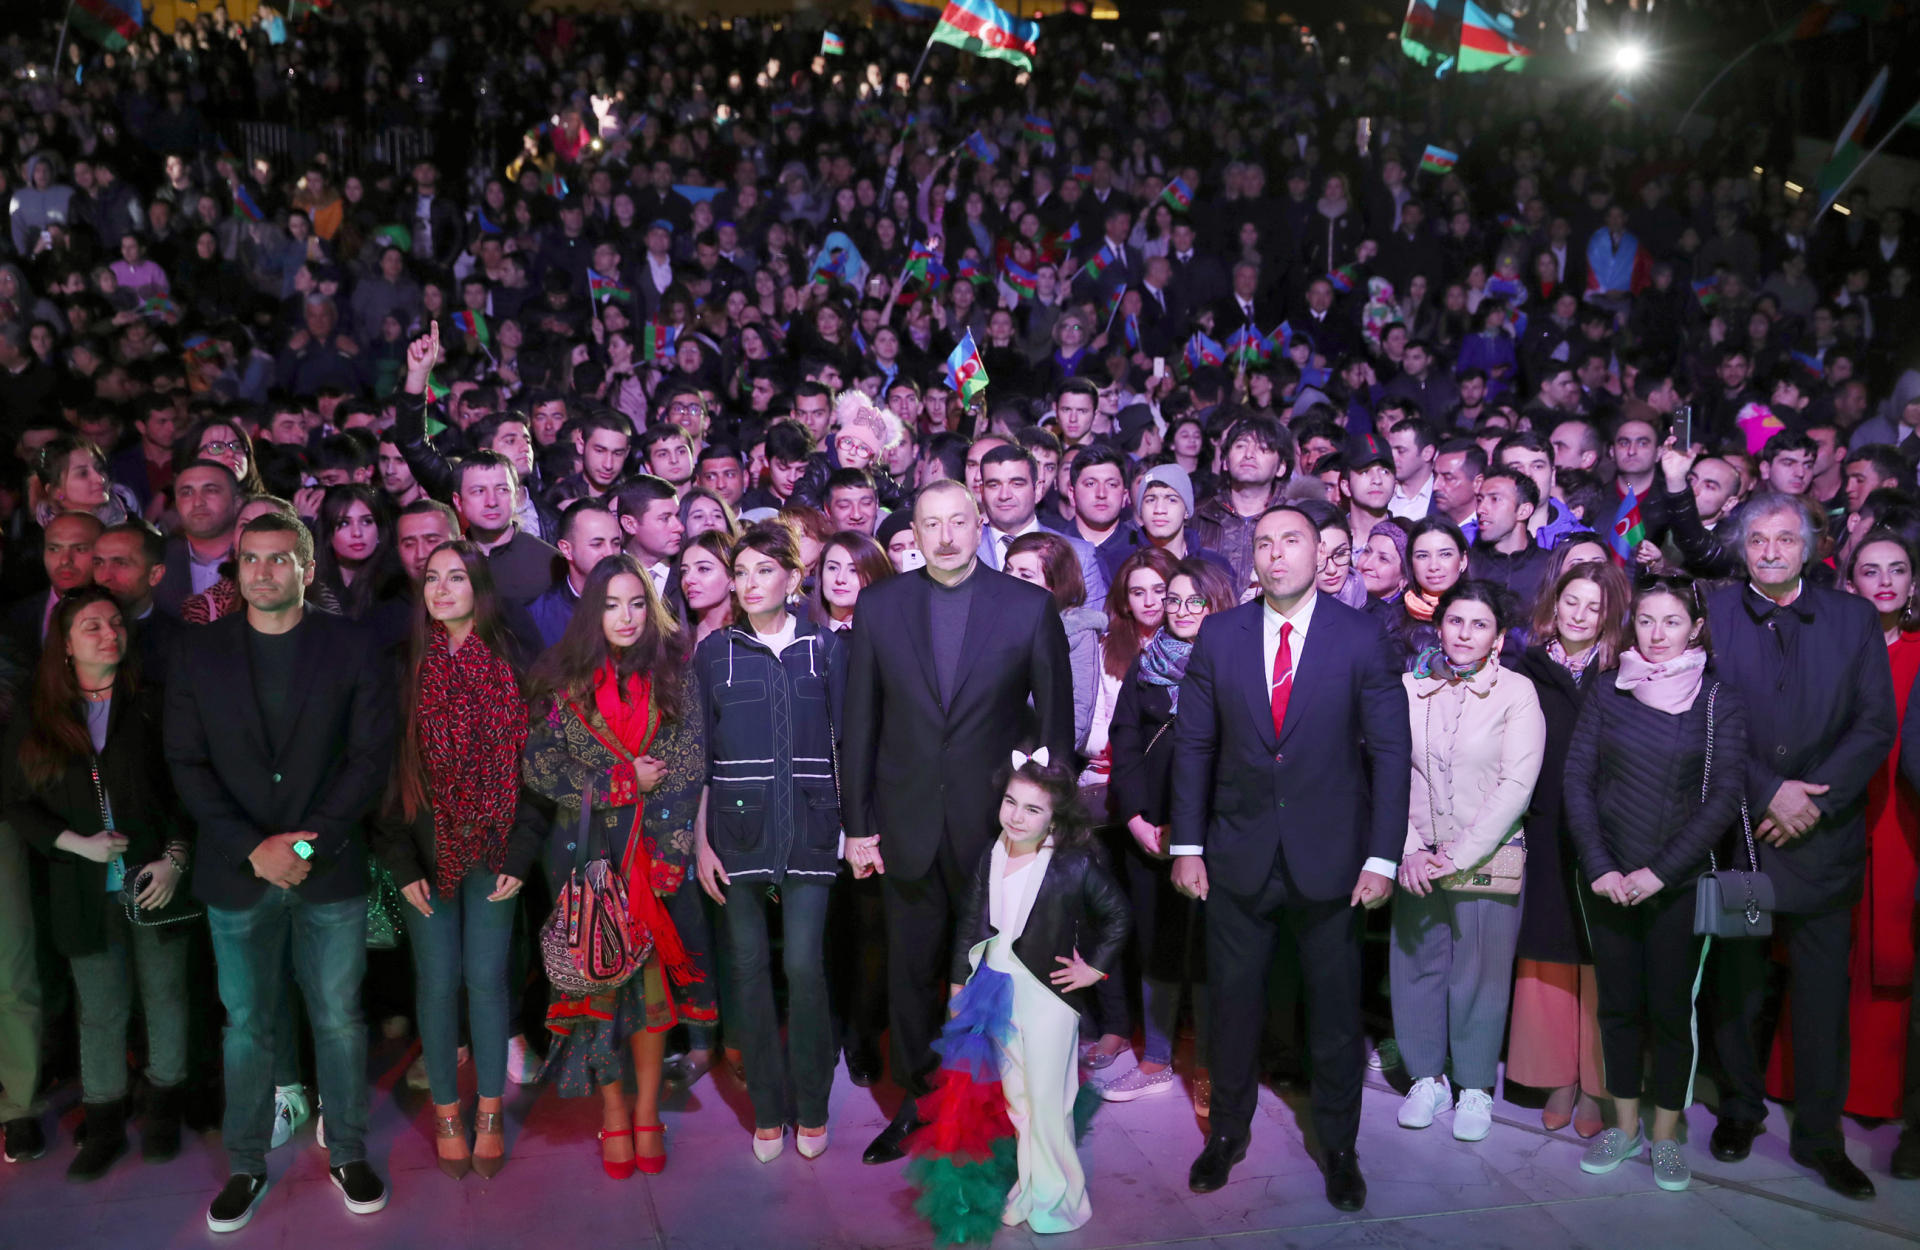 Video from concert on occasion of Ilham Aliyev's victory in presidential election